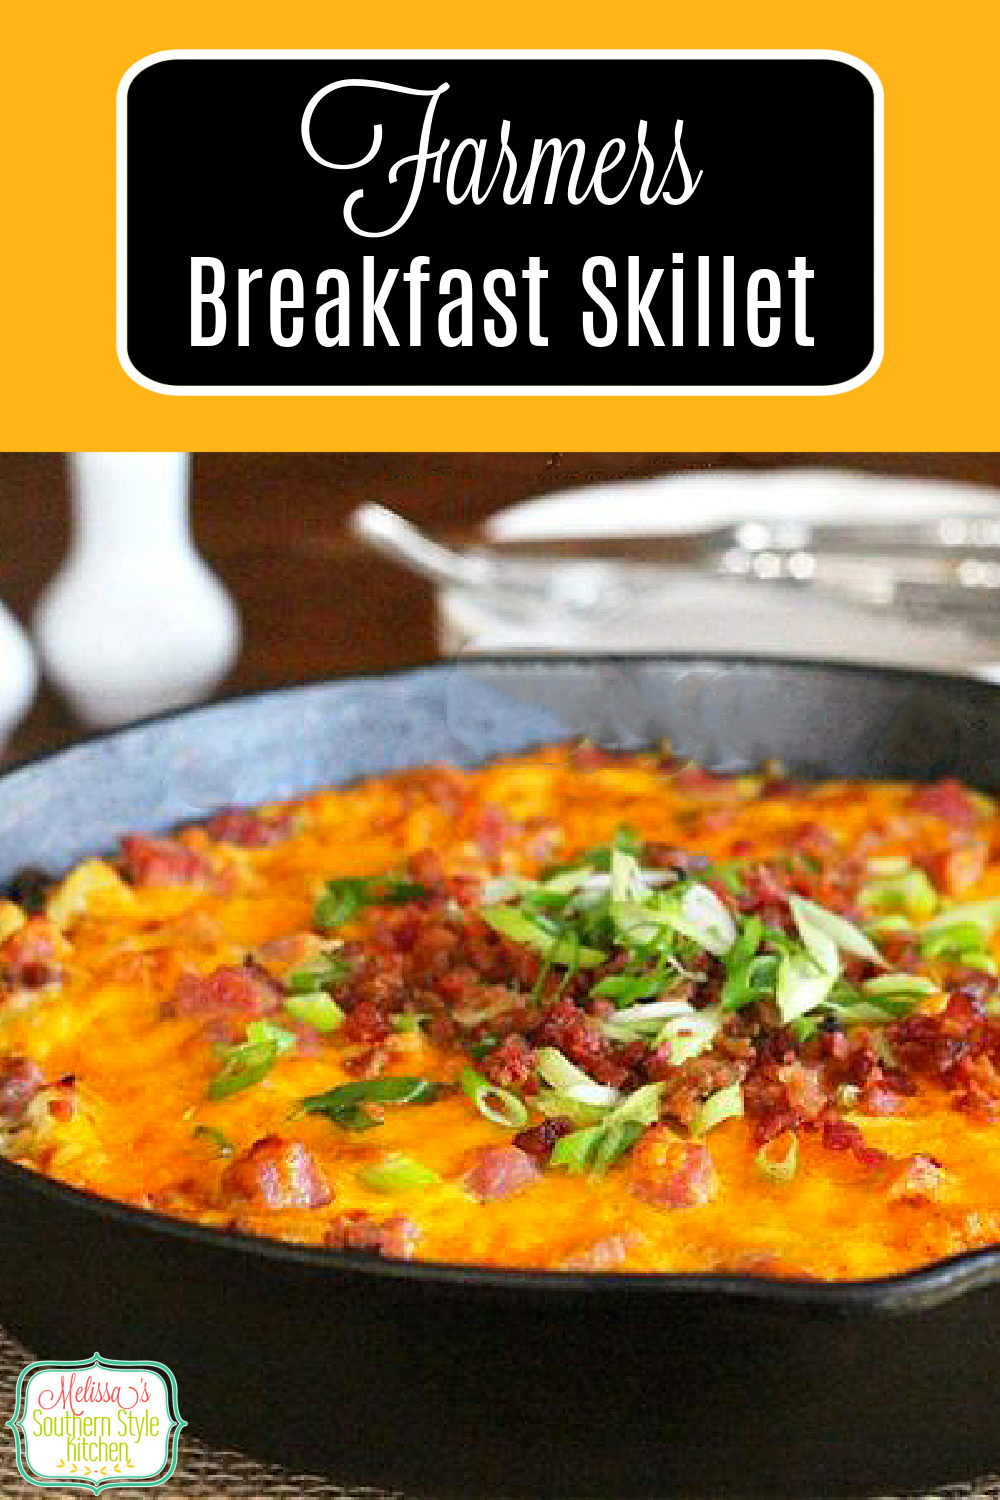 Start your morning with this cheesy skillet filled with ham, eggs and hash browns #farmersbreakfastskillet #eggs #baconandeggs #hahsbrowns #farmersbreakfast #brunchrecipes #breakfast #southernfood #southernrecipes #bacon #holidaybrunch #castironrecipes